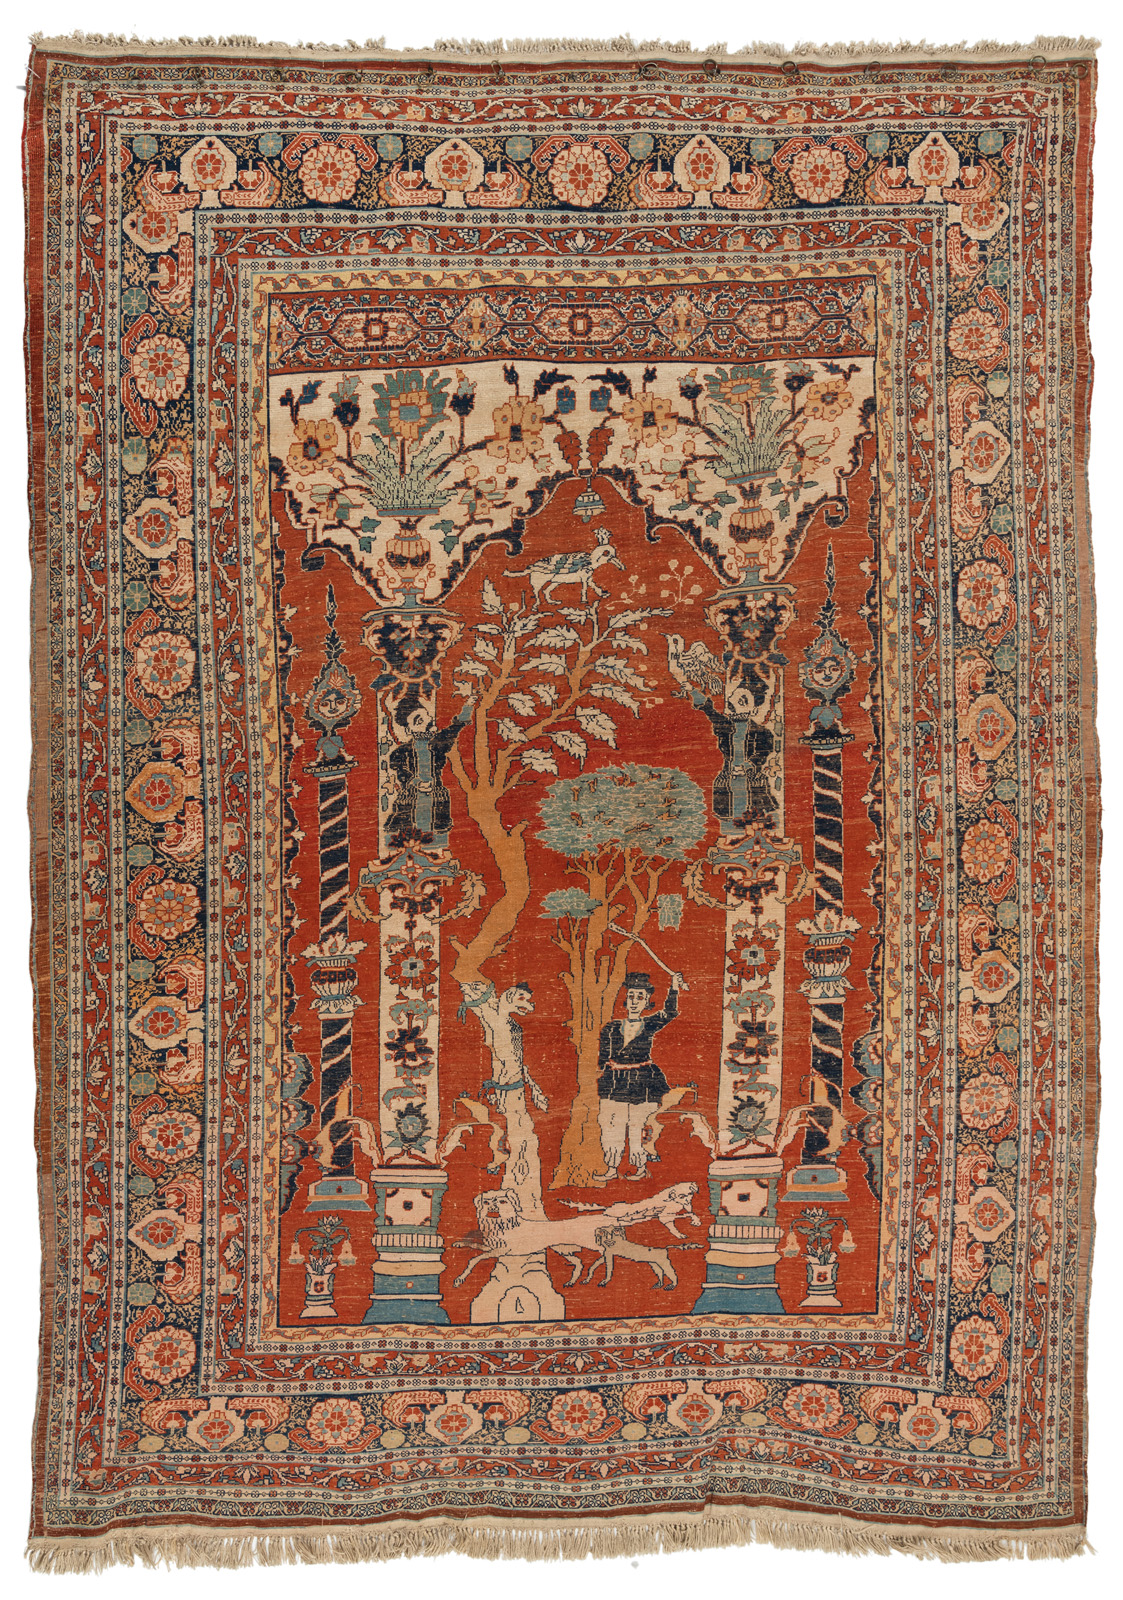 A FINE AND ANTIQUE SILK PRAYER HERIZ RUG WITH FIGURAL SCENE - Image 6 of 6